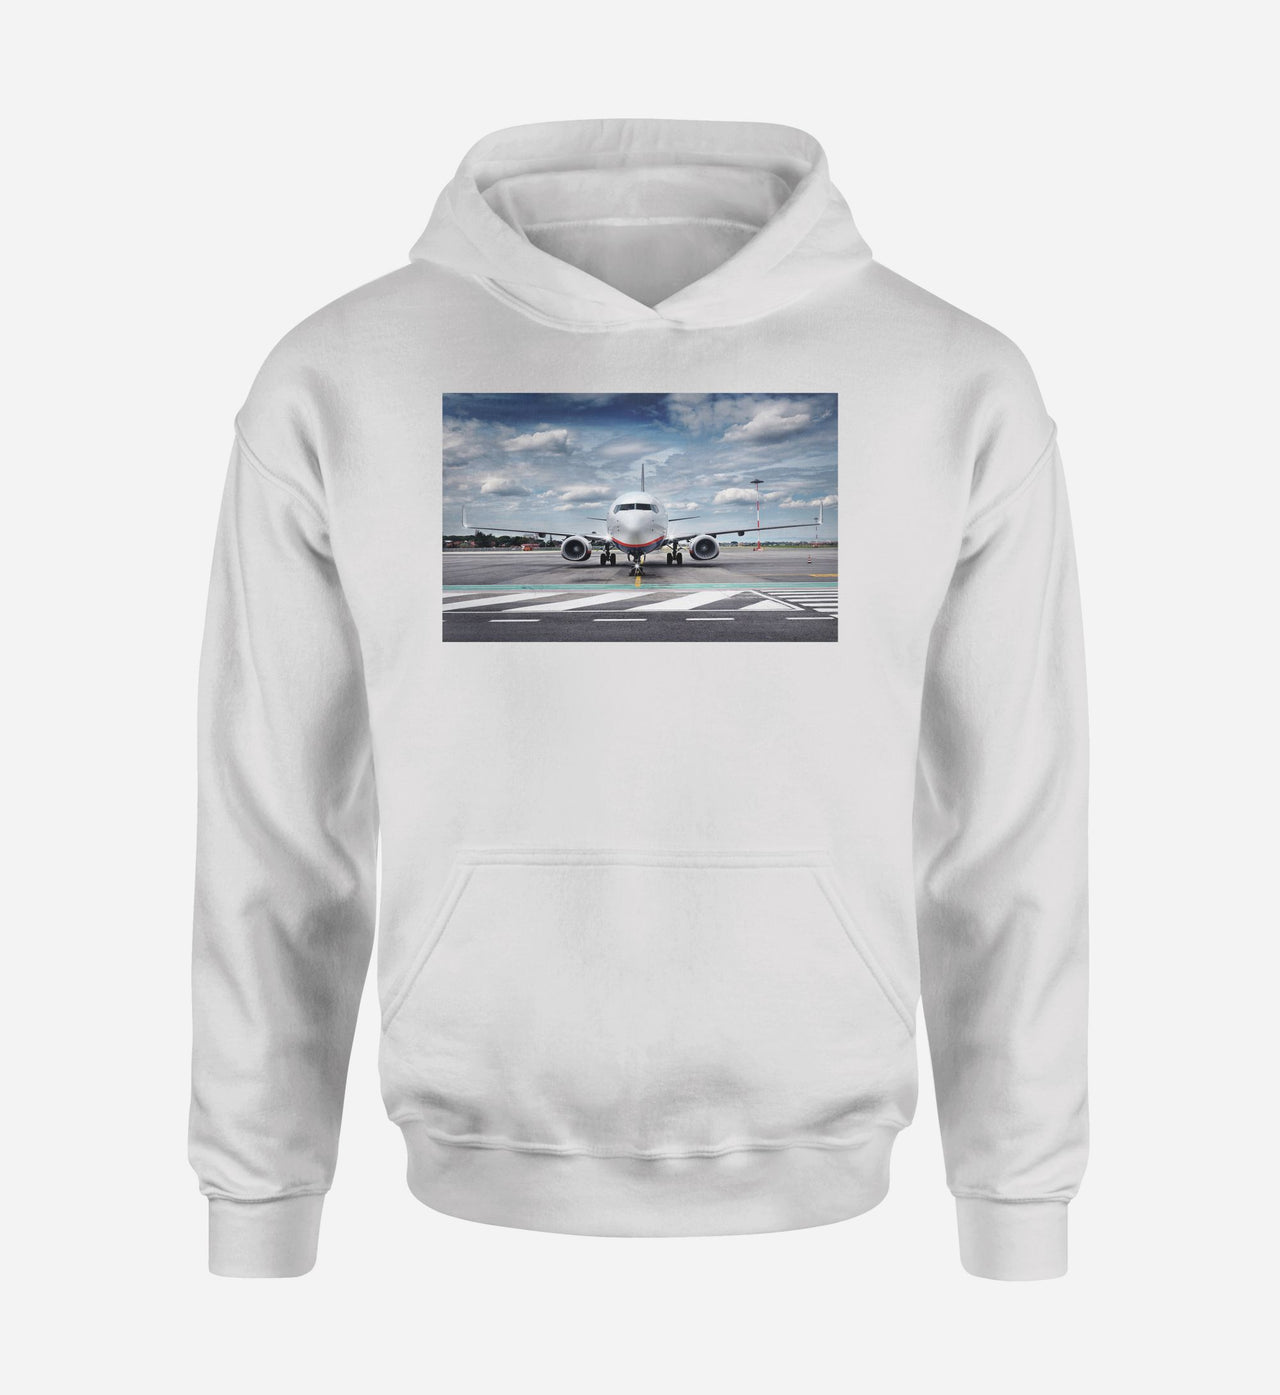 Amazing Clouds and Boeing 737 NG Designed Hoodies